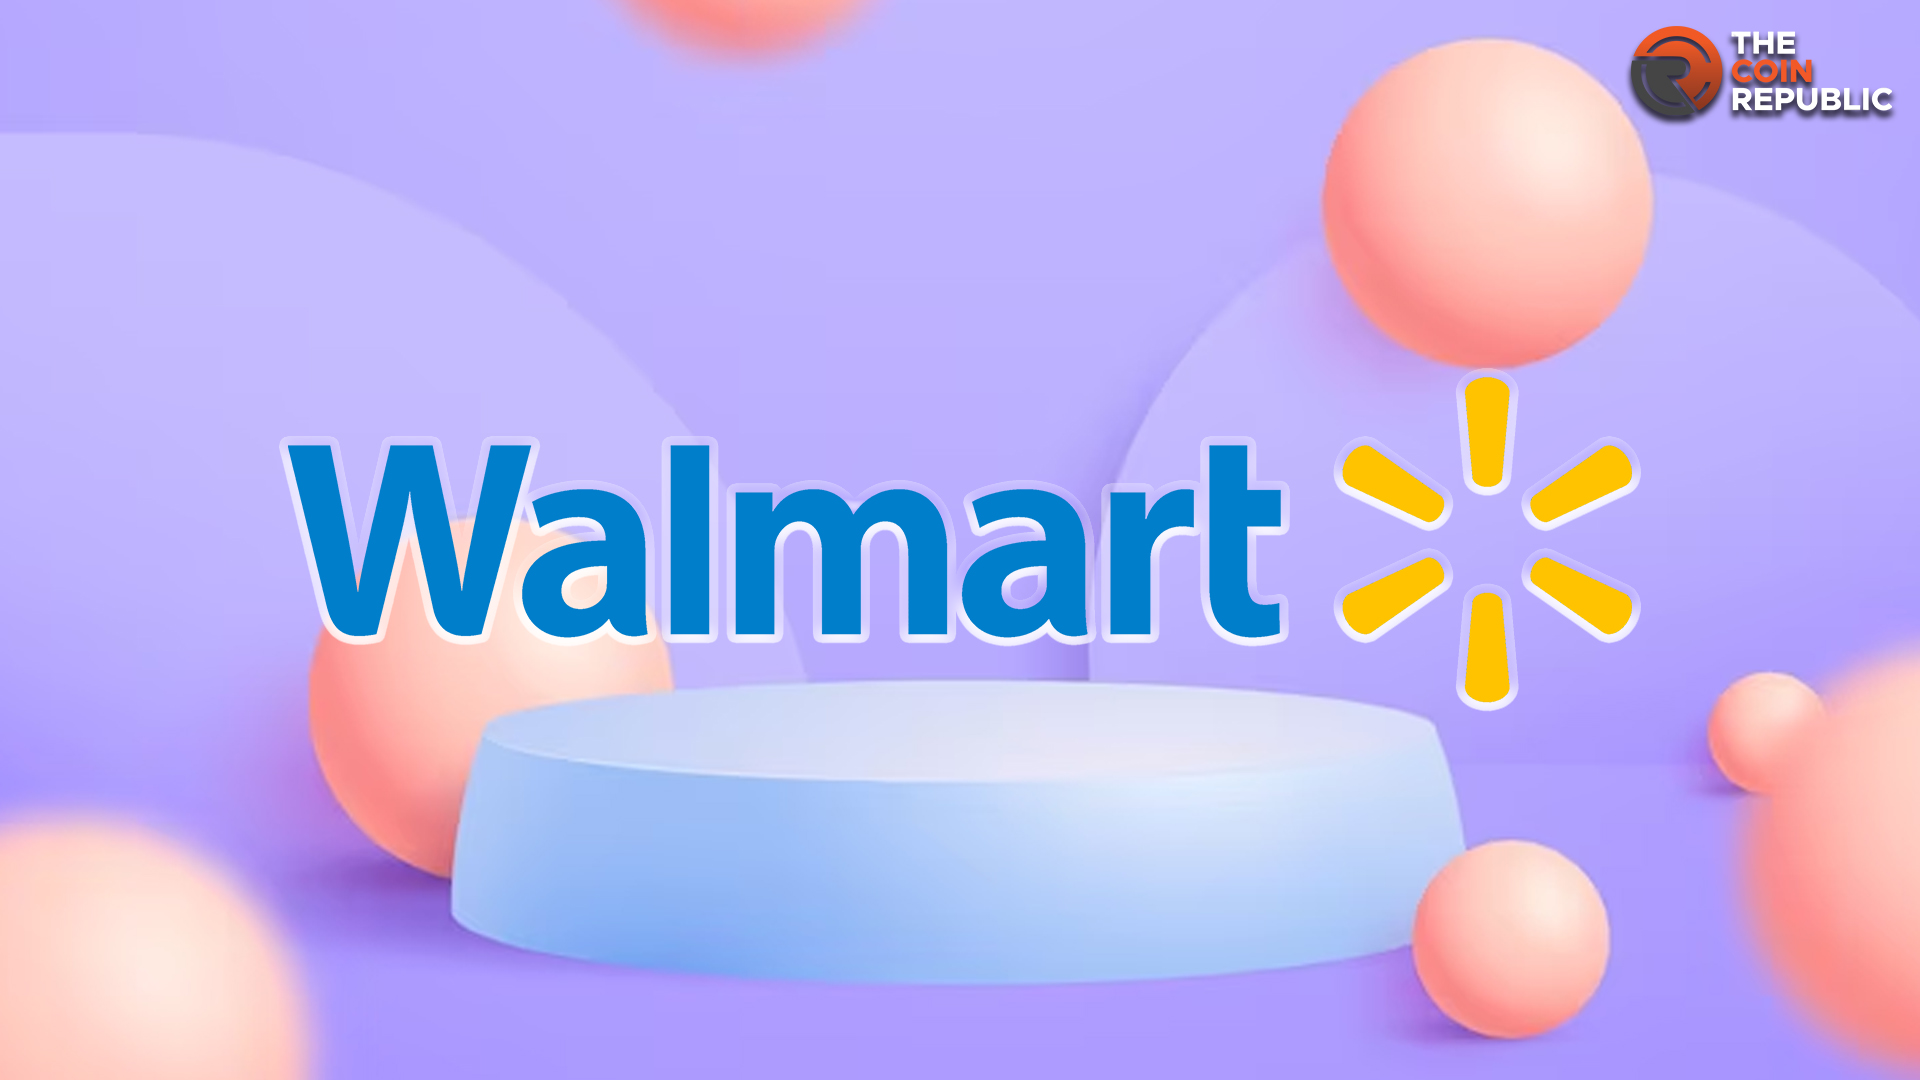 Walmart Stock Price Soaring Near All-Time High: Will It Sustain?